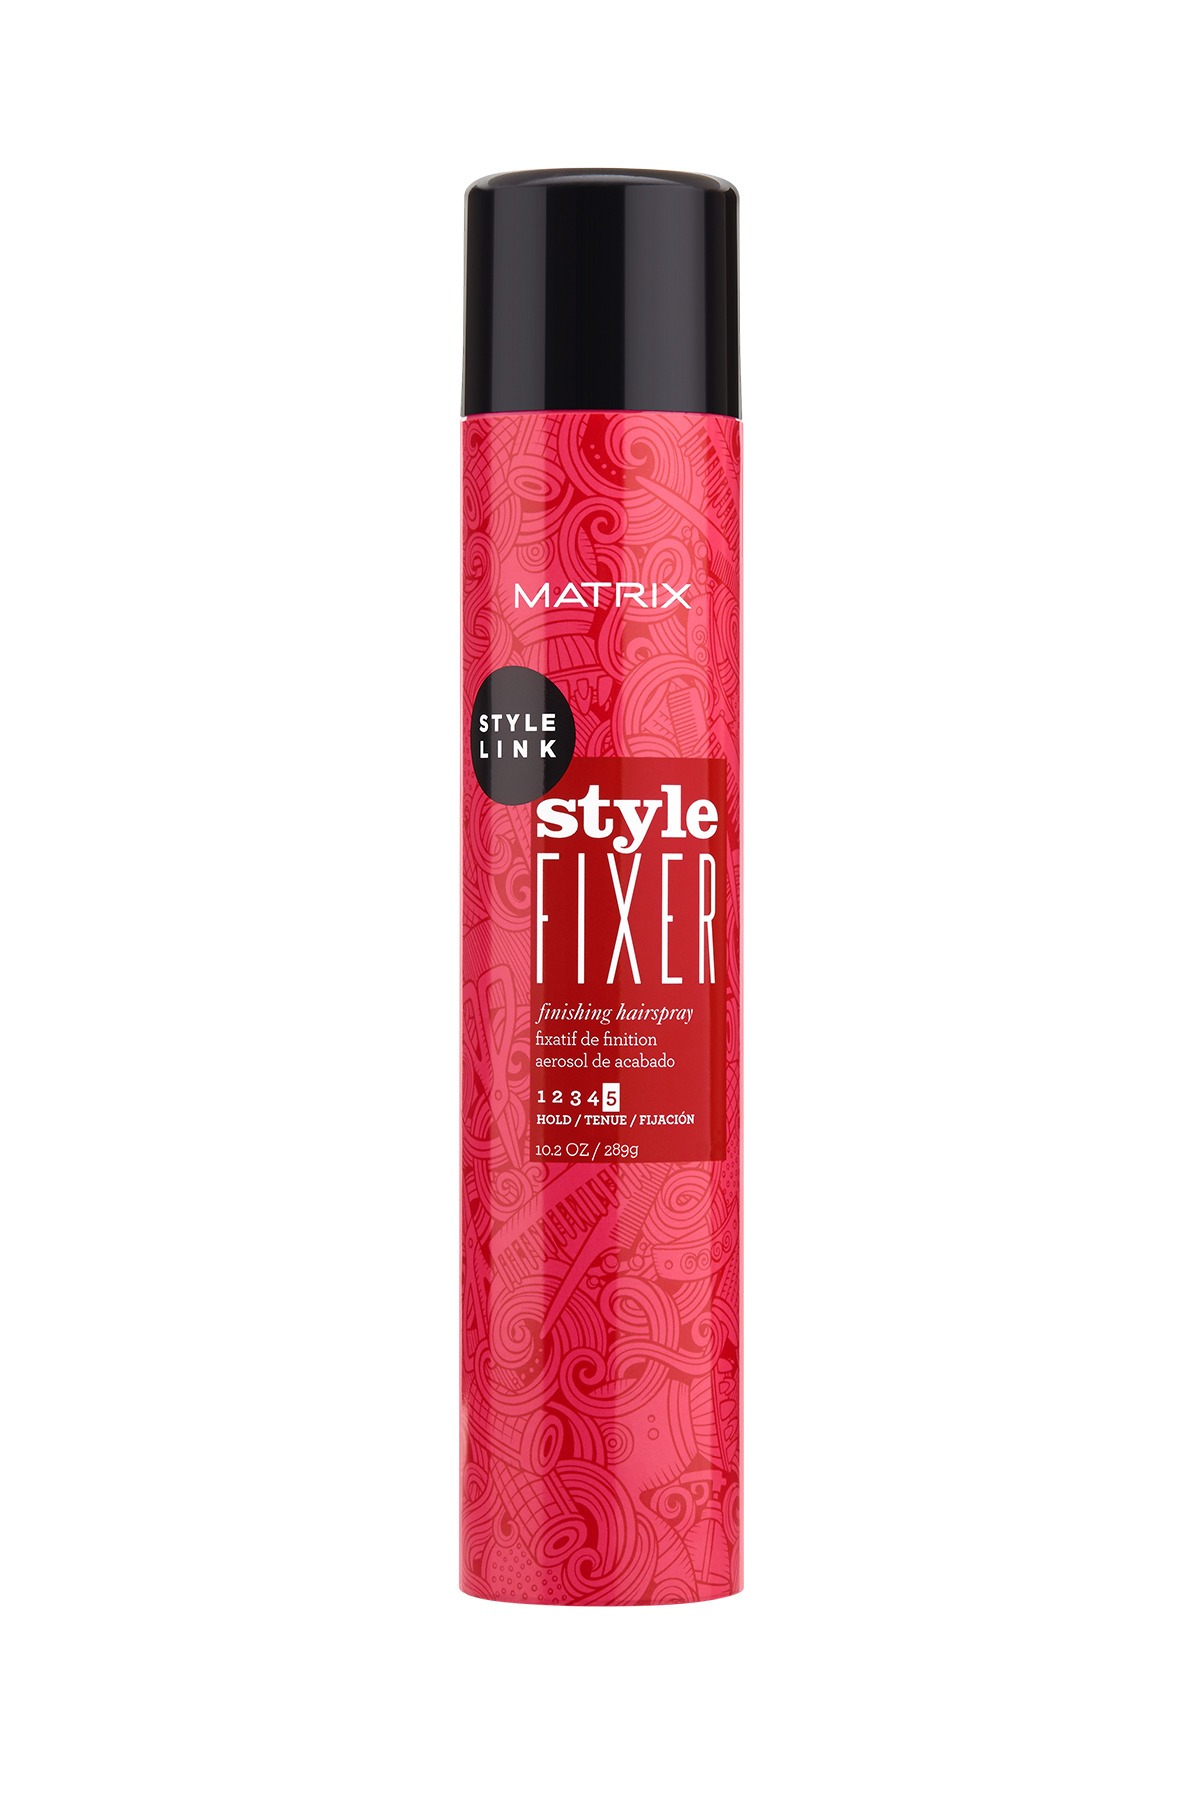 Style Link STYLE FIXER, Fixierspray, 400 ml